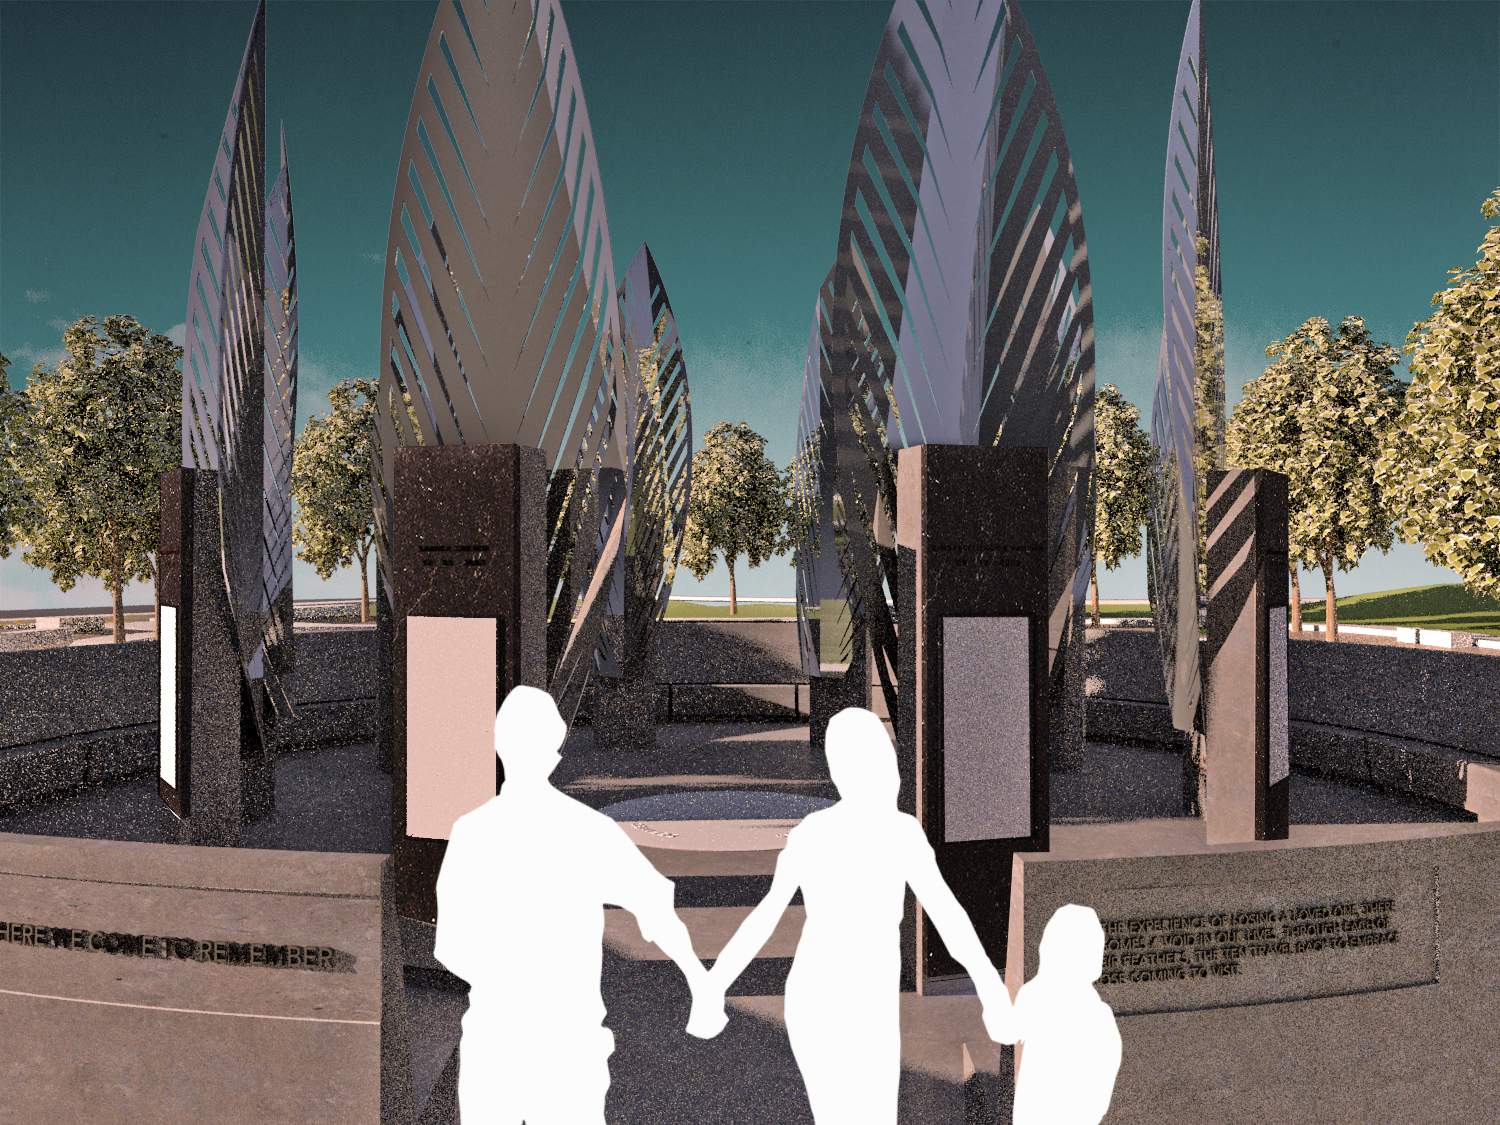 New memorial designed by UH Architecture students to commemorate Santa Fe victims